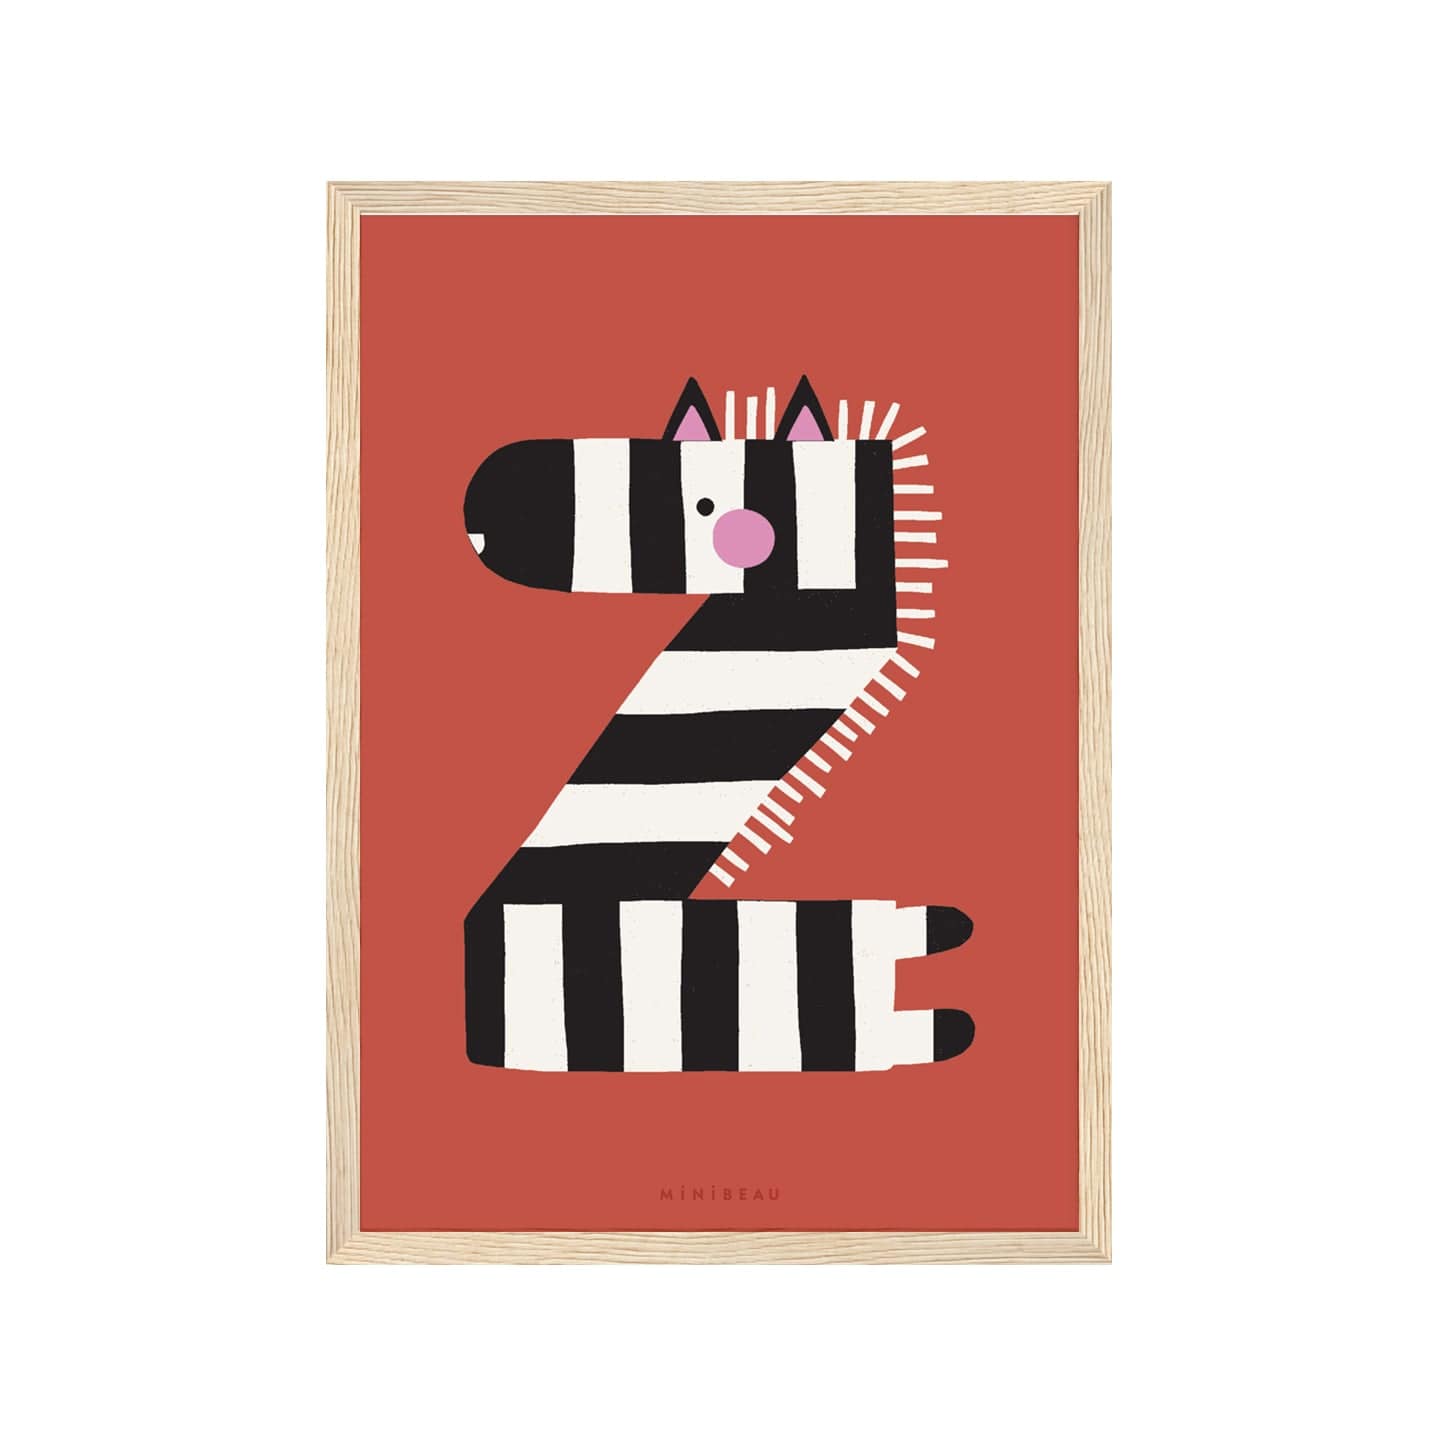 Art print in a light wood frame. Our Happy Alphabet 'Z' Art Print shows a smiling zebra with rosy cheeks, in the shape of a Z on a red background.